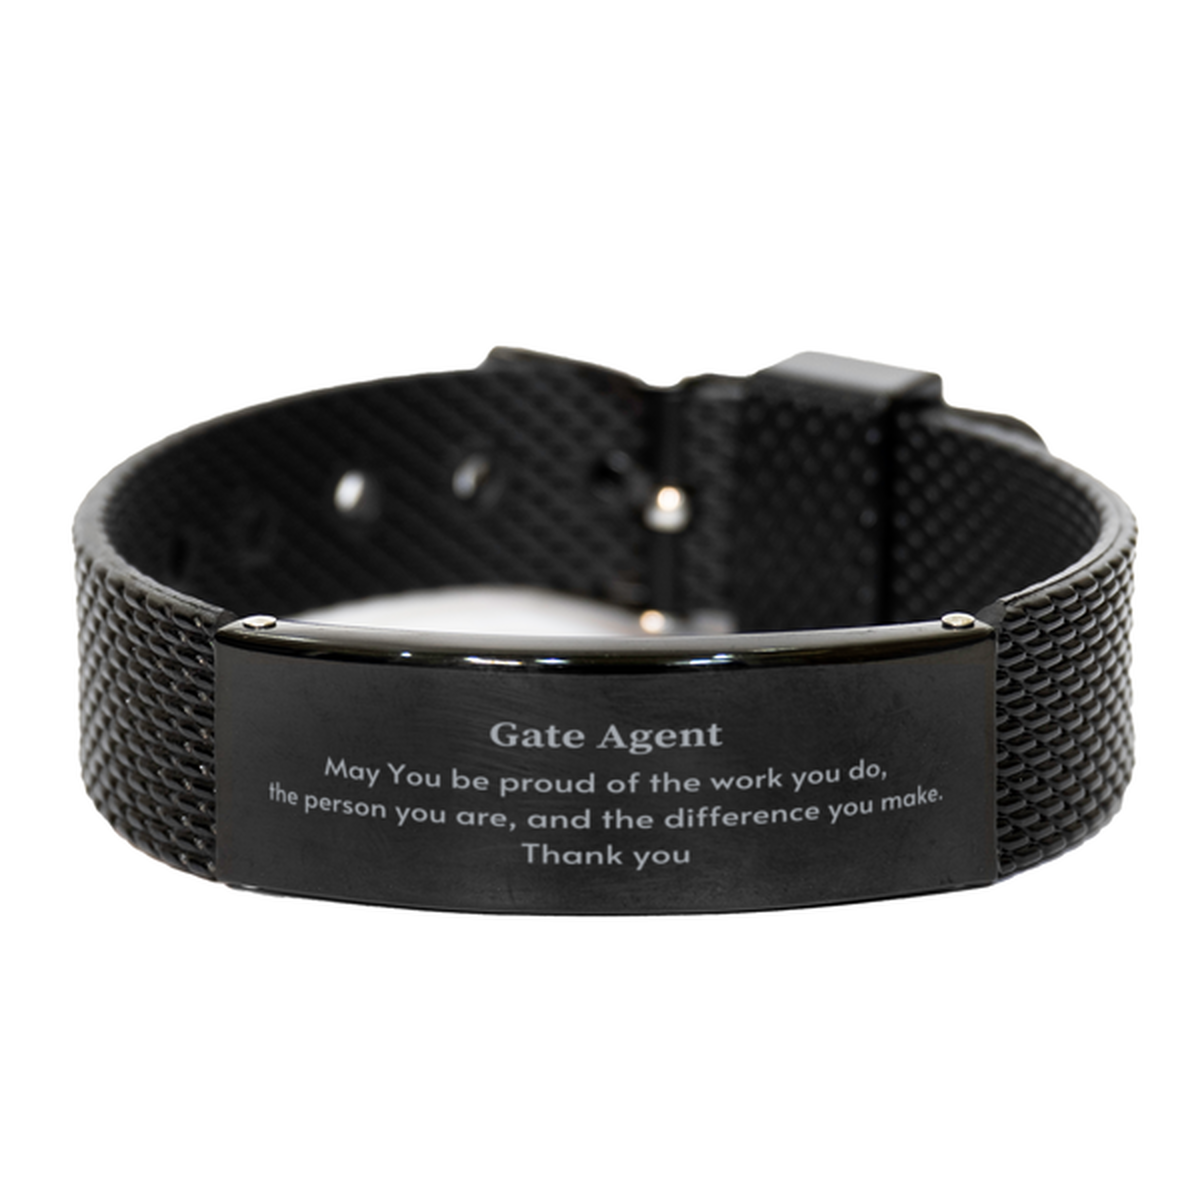 Heartwarming Black Shark Mesh Bracelet Retirement Coworkers Gifts for Gate Agent, Gate Agent May You be proud of the work you do, the person you are Gifts for Boss Men Women Friends